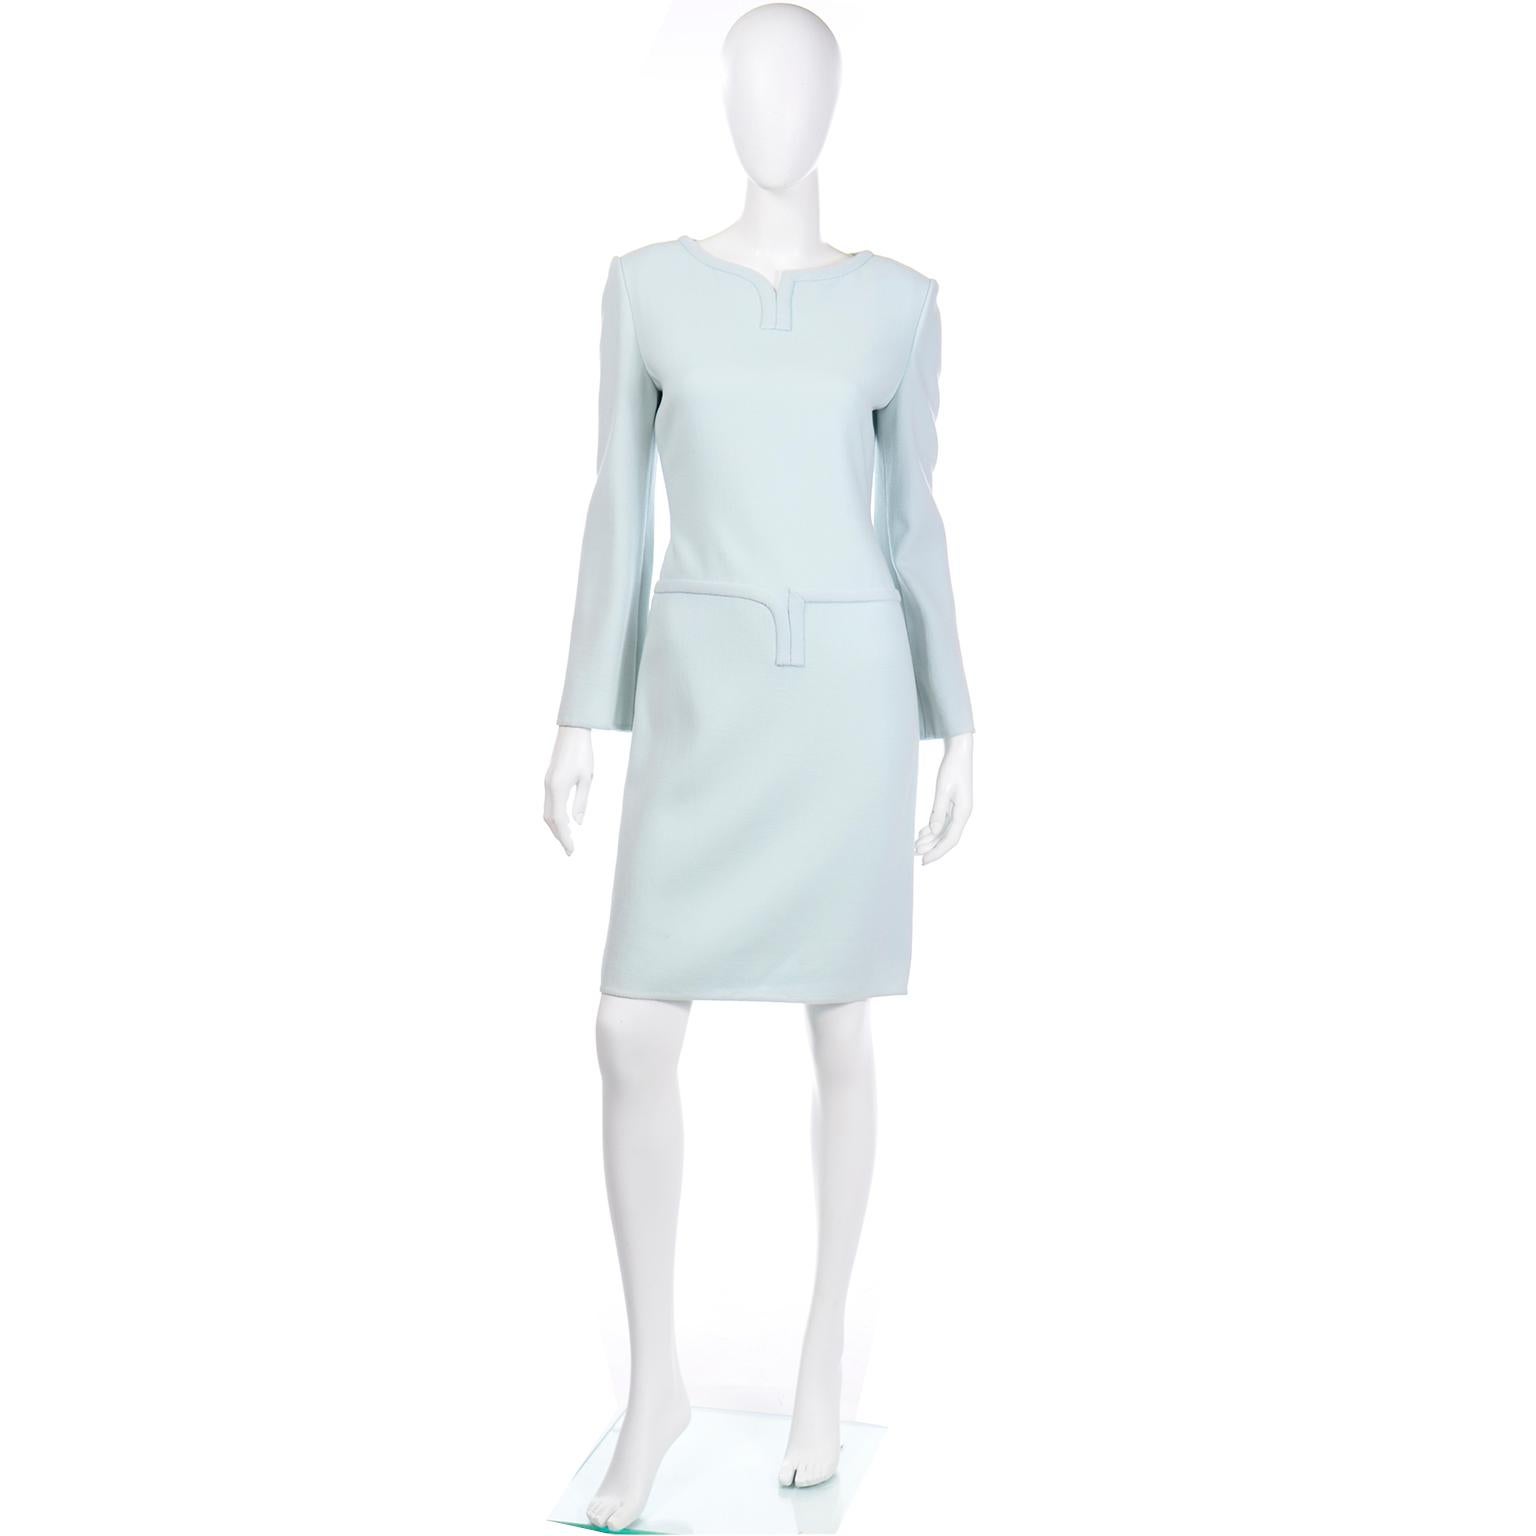 This outstanding blue wool crepe Bill Blass vintage dress appears to have never been worn. We love vintage Bill Blass dresses and the quality and construction are both truly exceptional. This dress is in such a pretty shade of blue and would make a